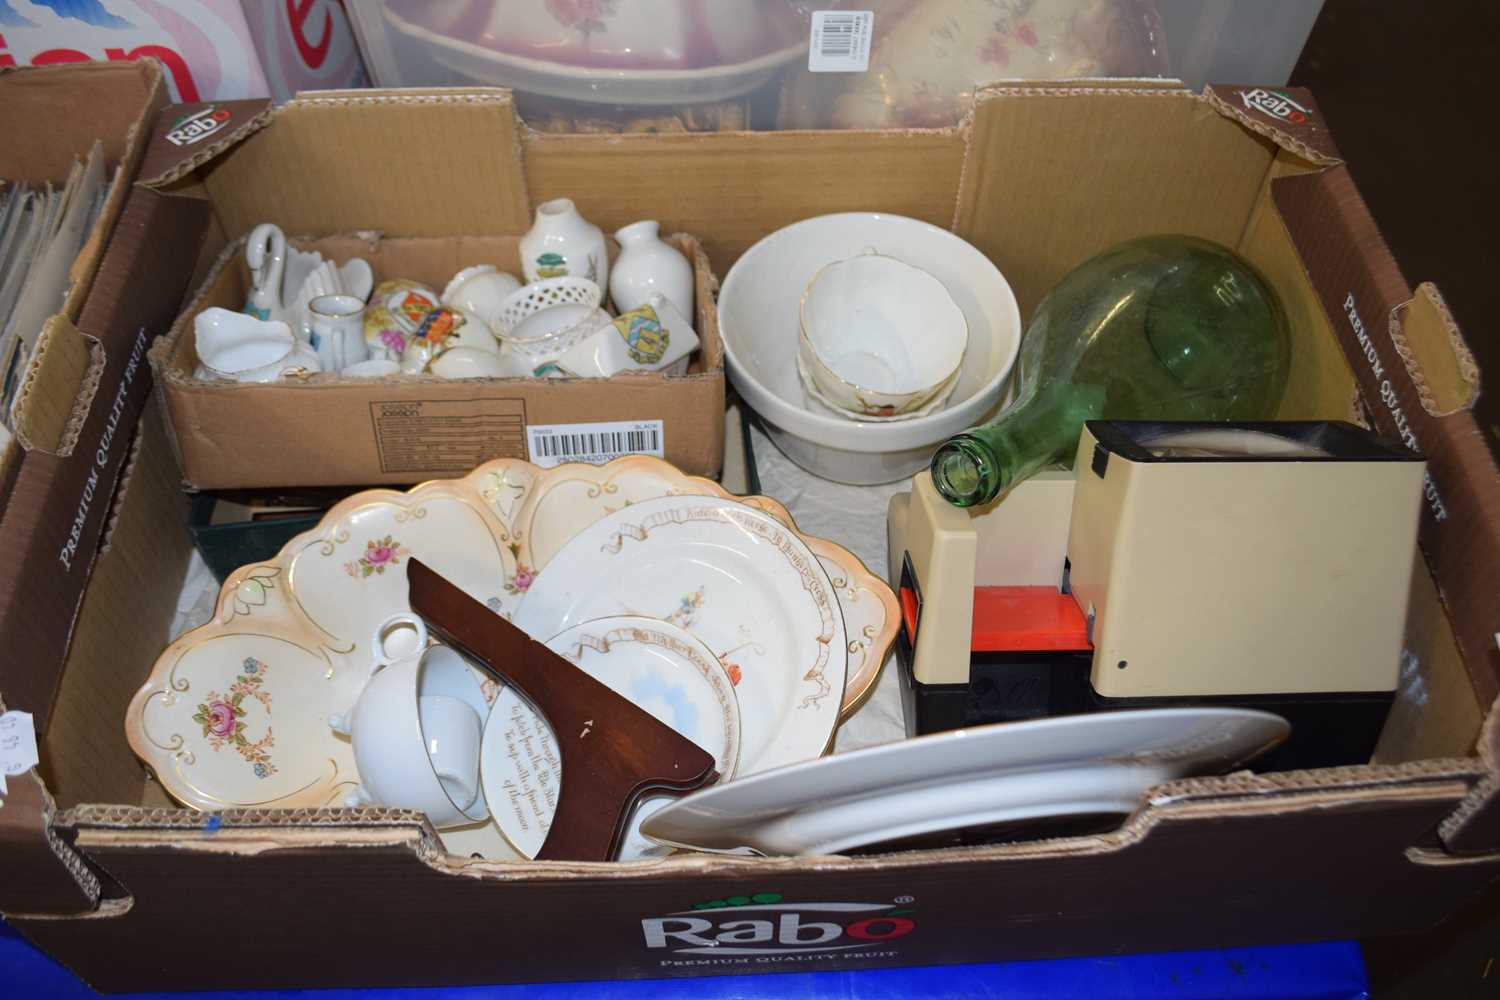 Mixed Lot: Royal Doulton, Crown Ducal, crested wares, flat ware and other items